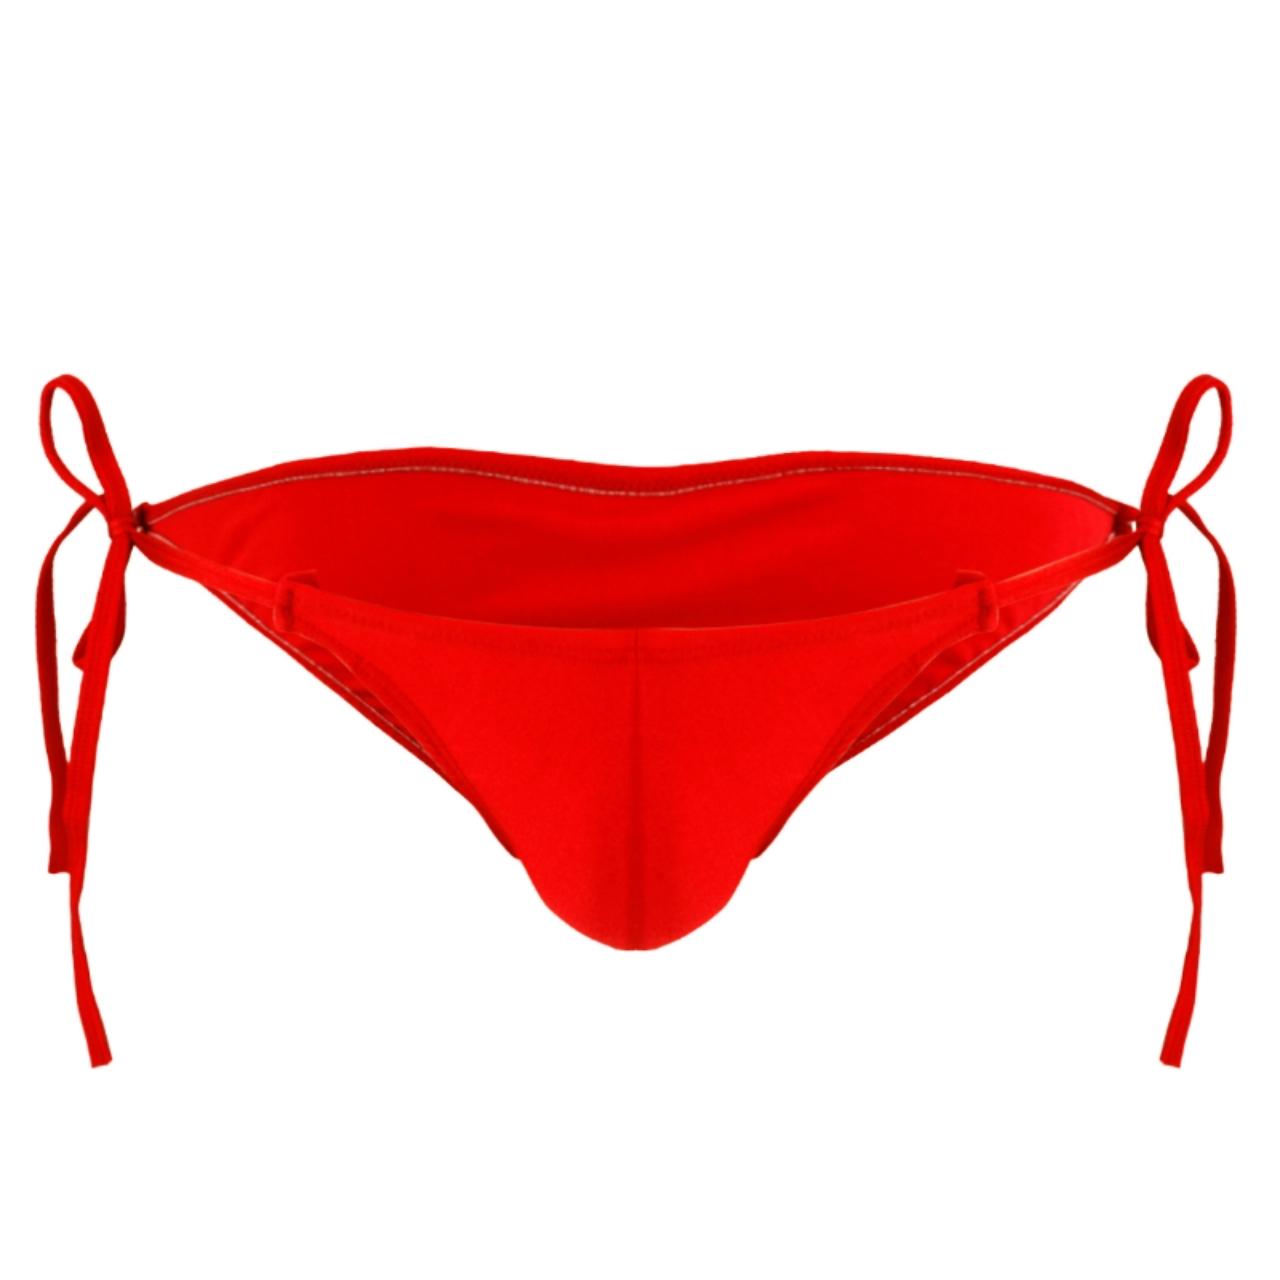 Men's Red Boxers-and-briefs (4)